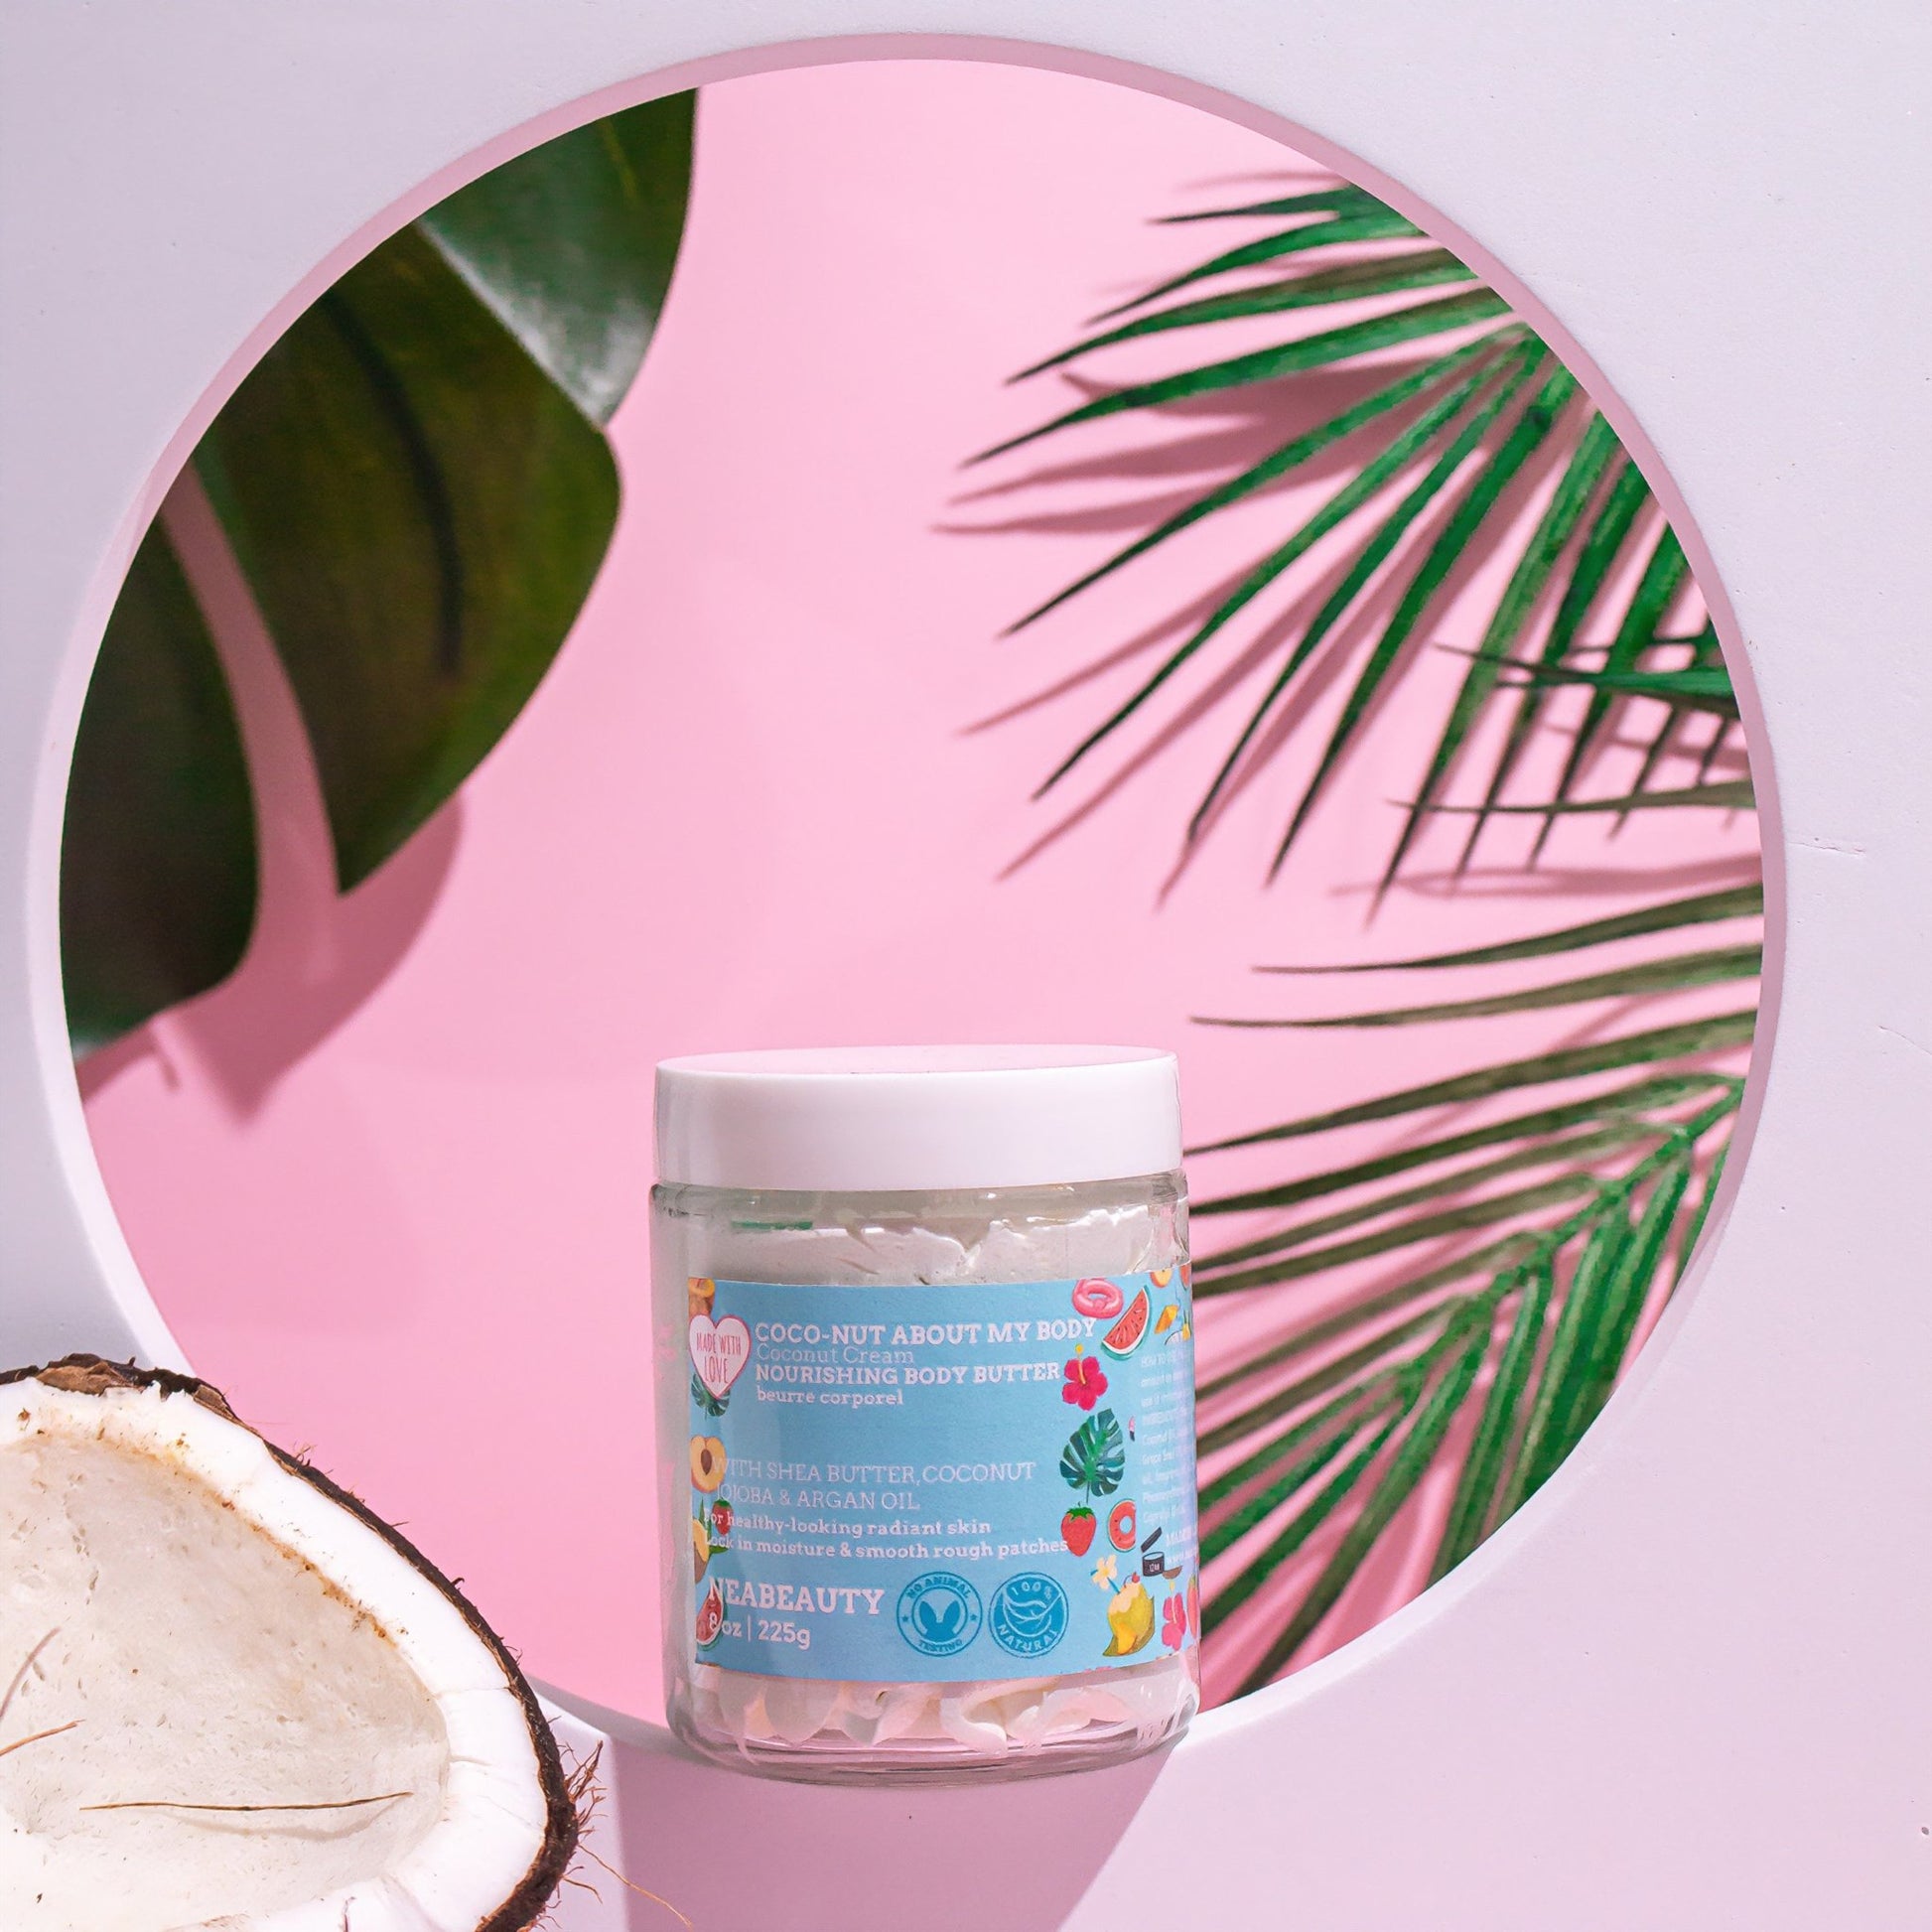 Coco-Nuts About You Body Mousse - NEABEAUTY